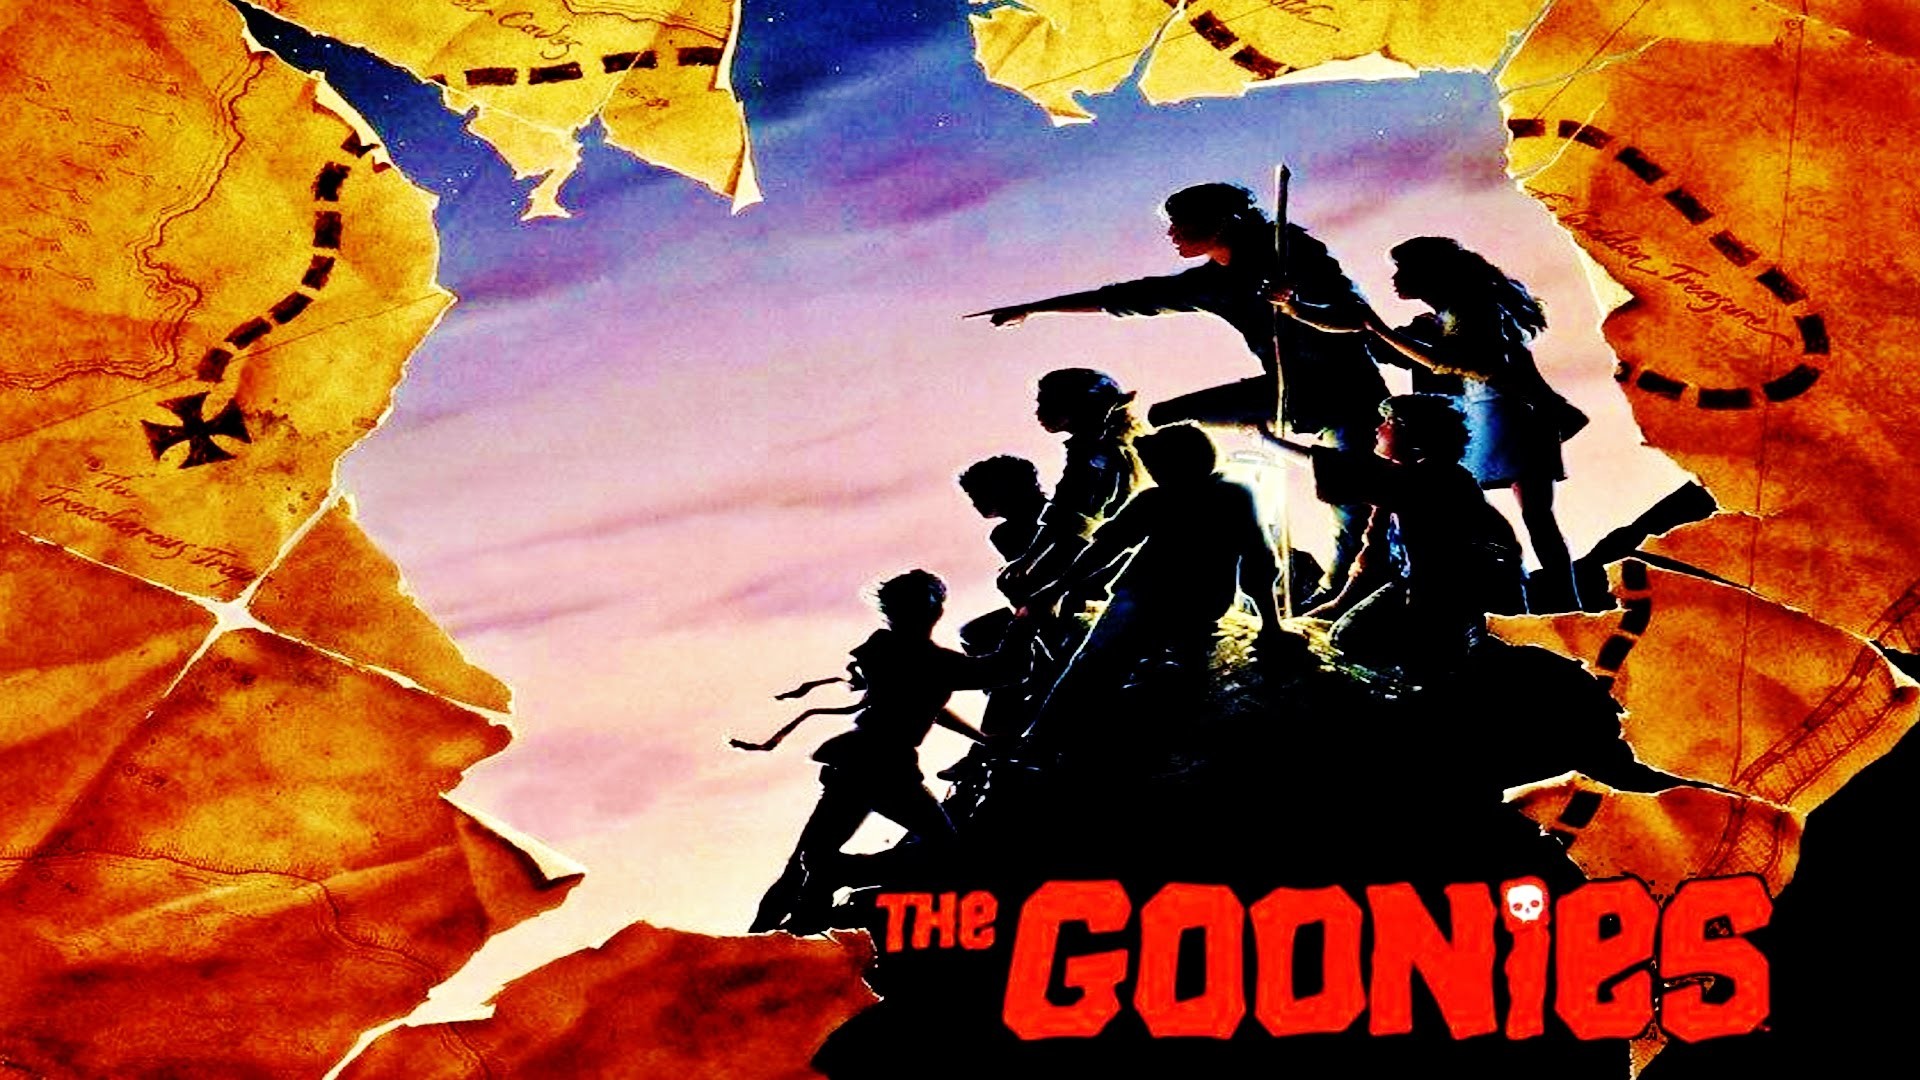 1920x1080 The Goonies (Movie Review)